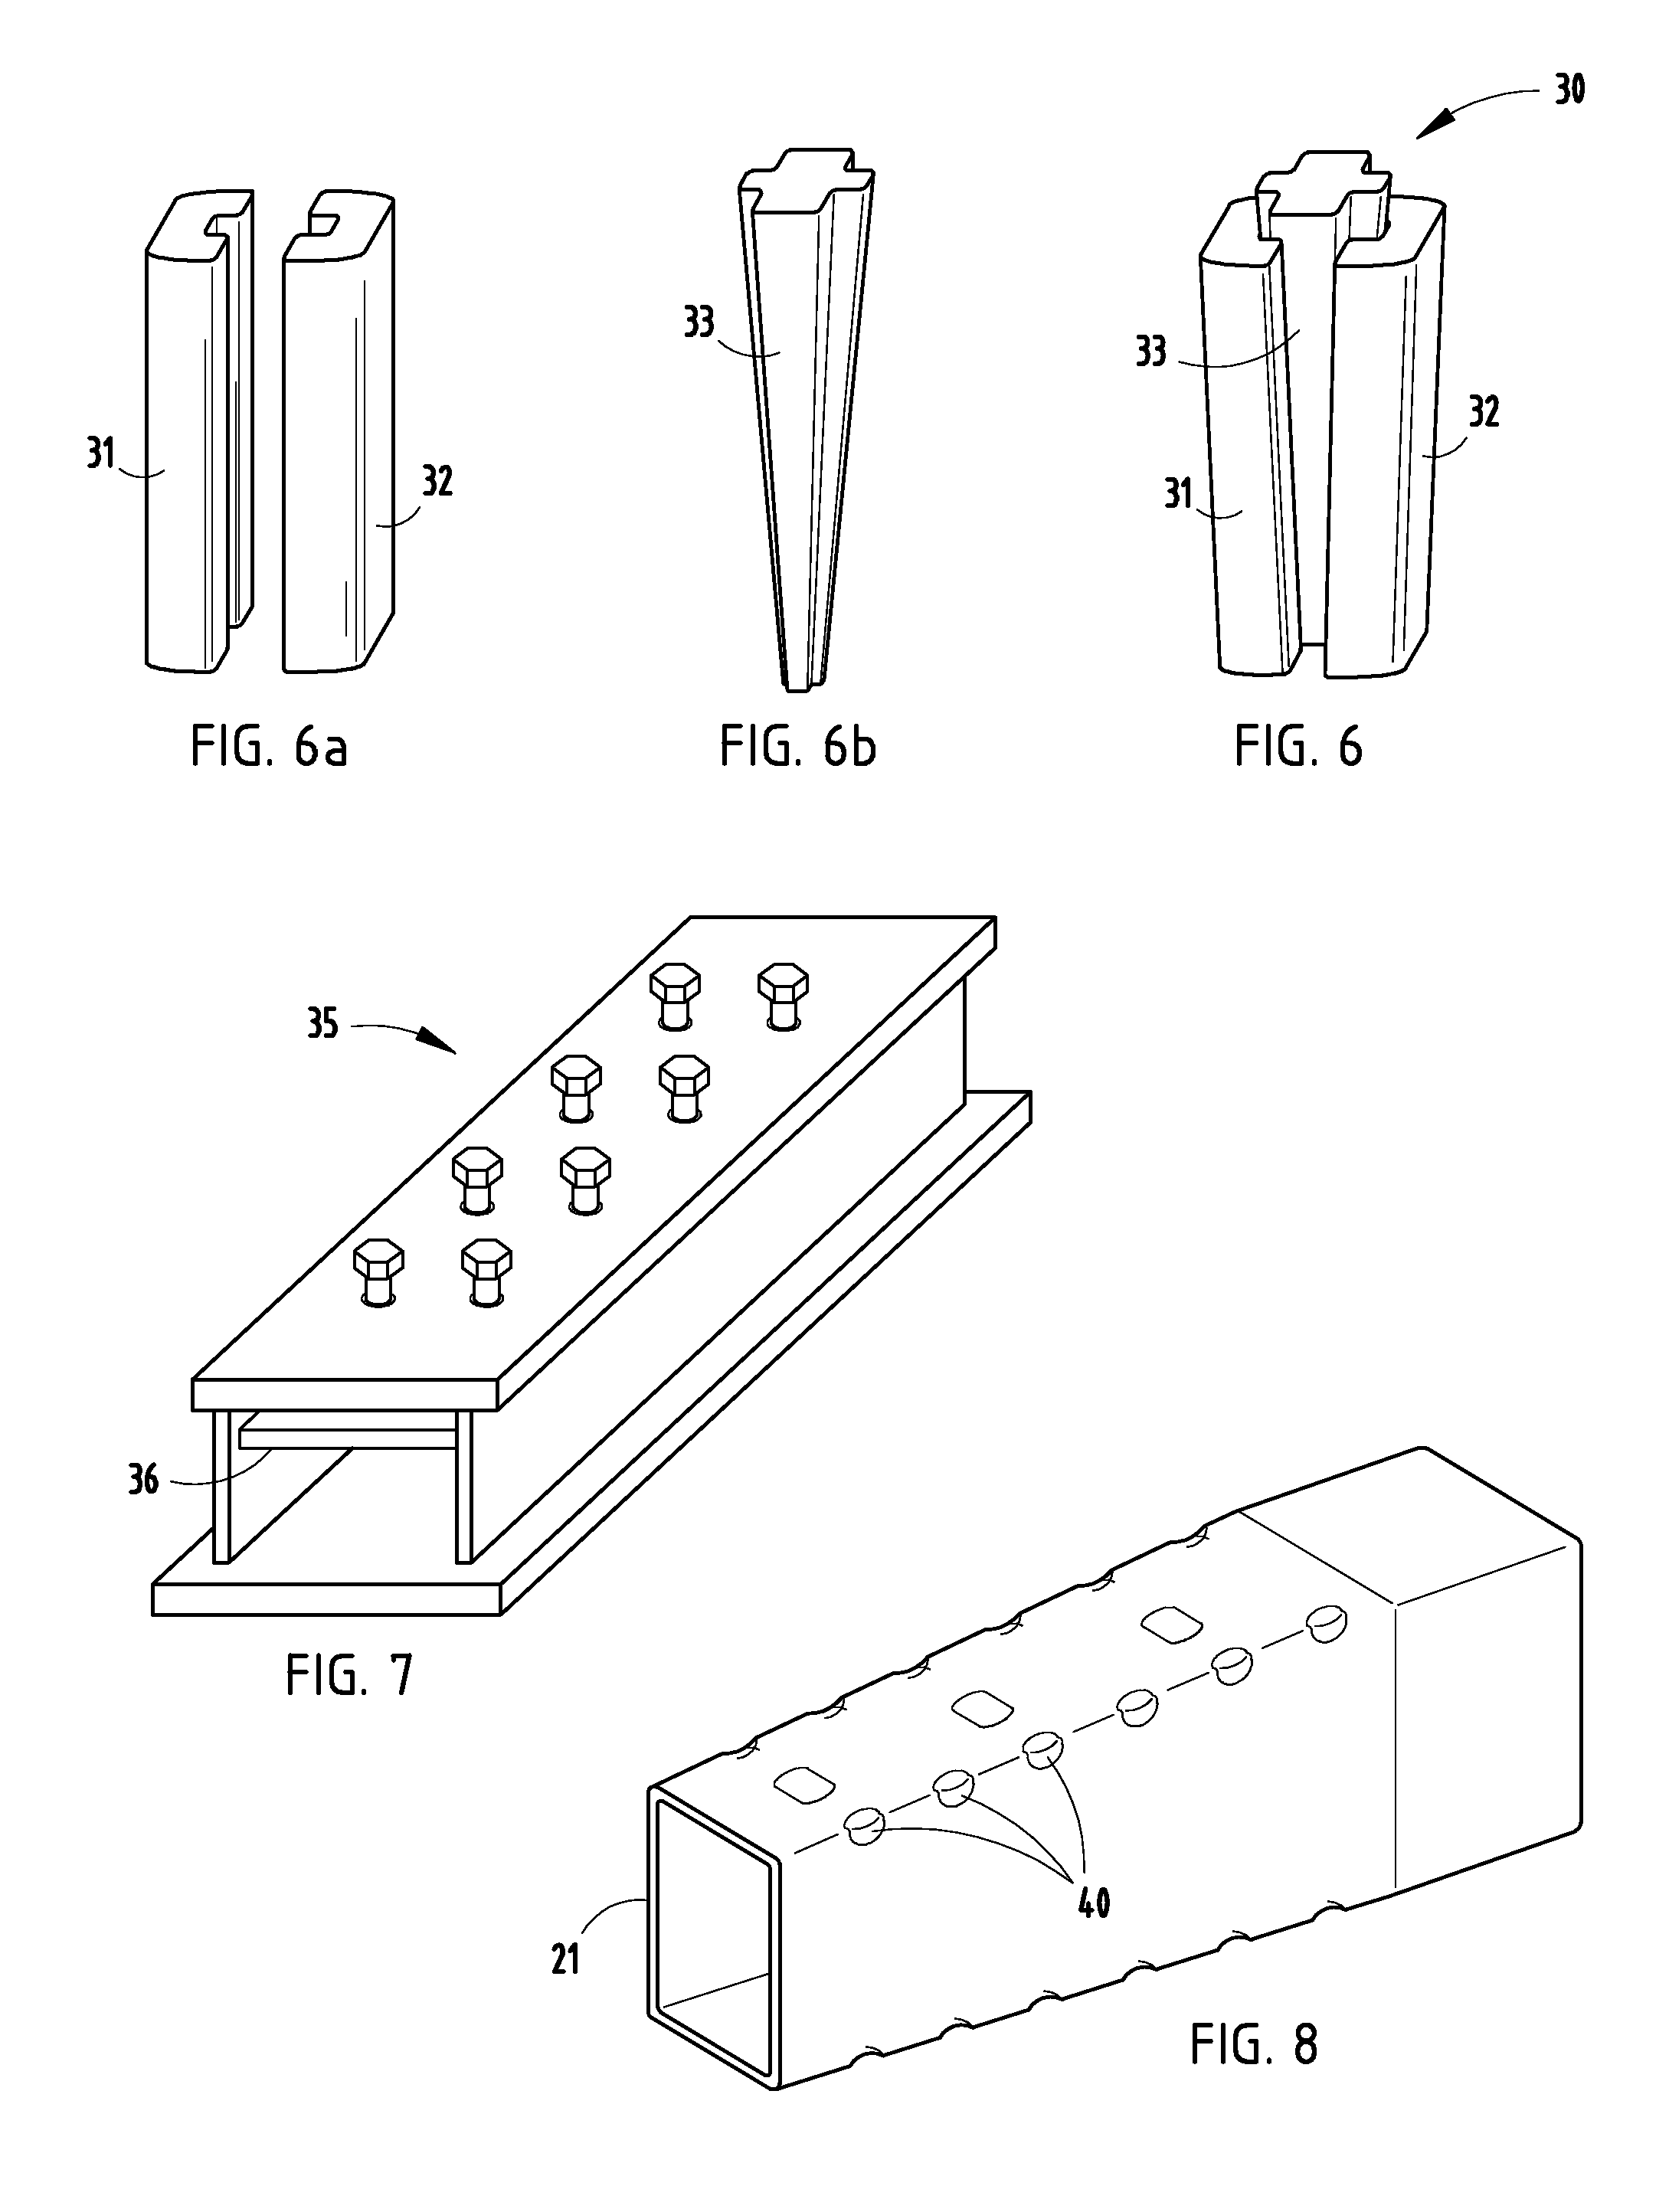 Tubular tapered crushable structures and manufacturing methods